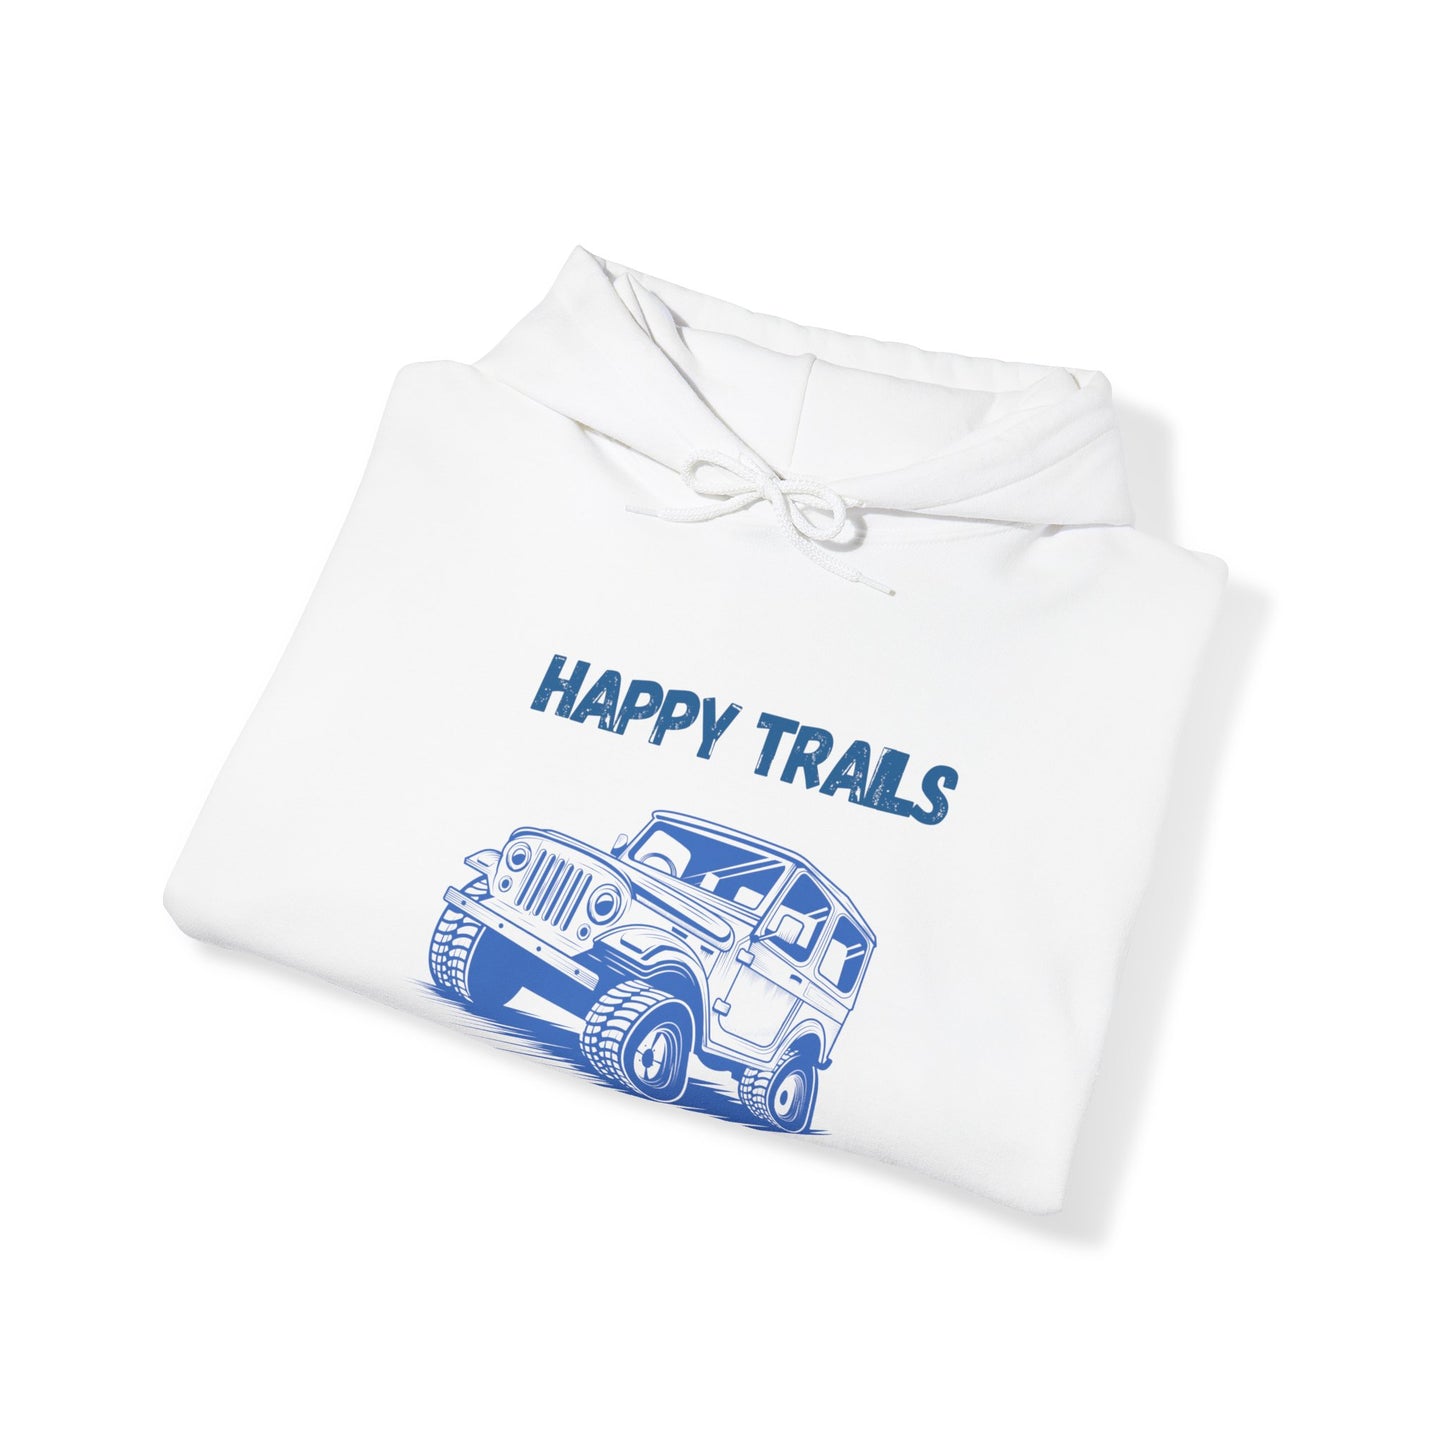 Exploring Happy Trails In a Jeep. Unisex Hooded Sweatshirt.